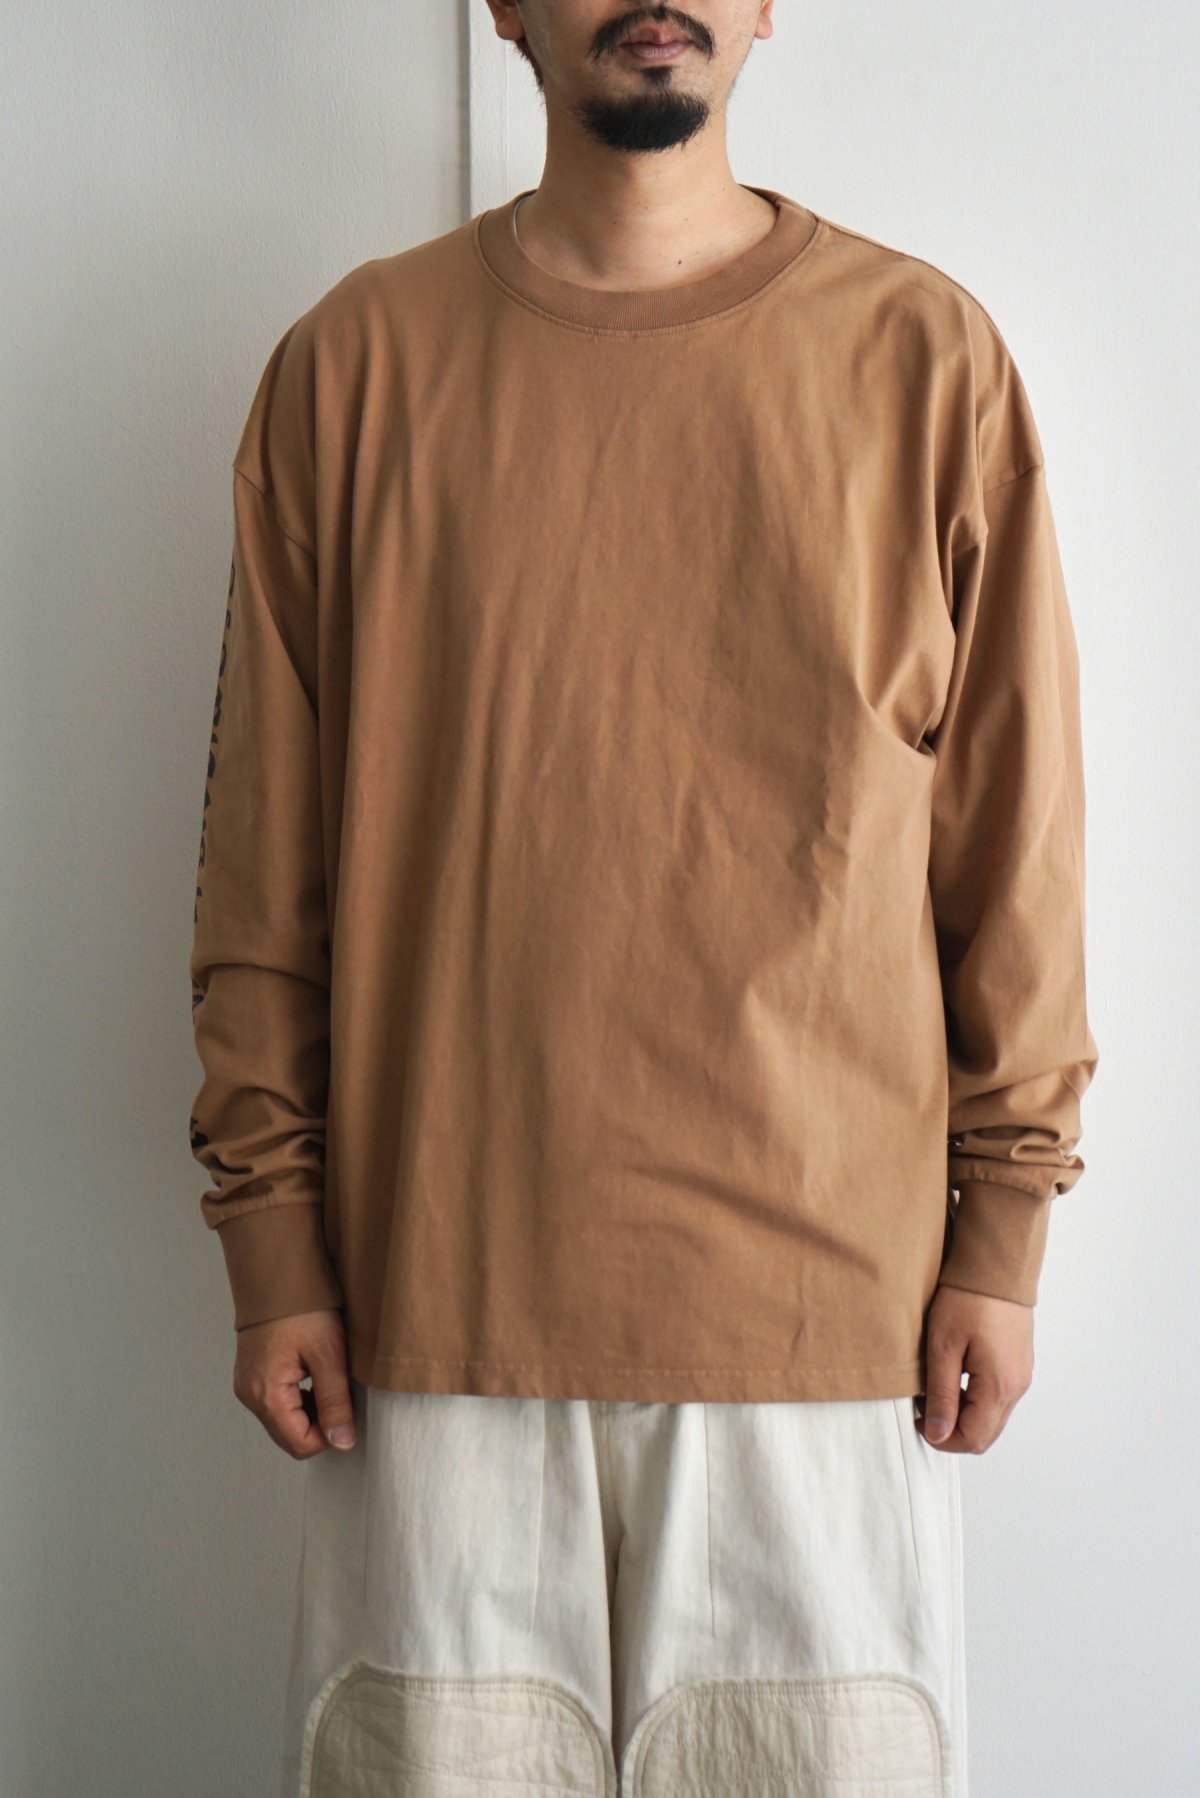 MERELY MADE / MUAY-THAY ARTWORK LONG SLEEVE T-SHIRT / BEIGE